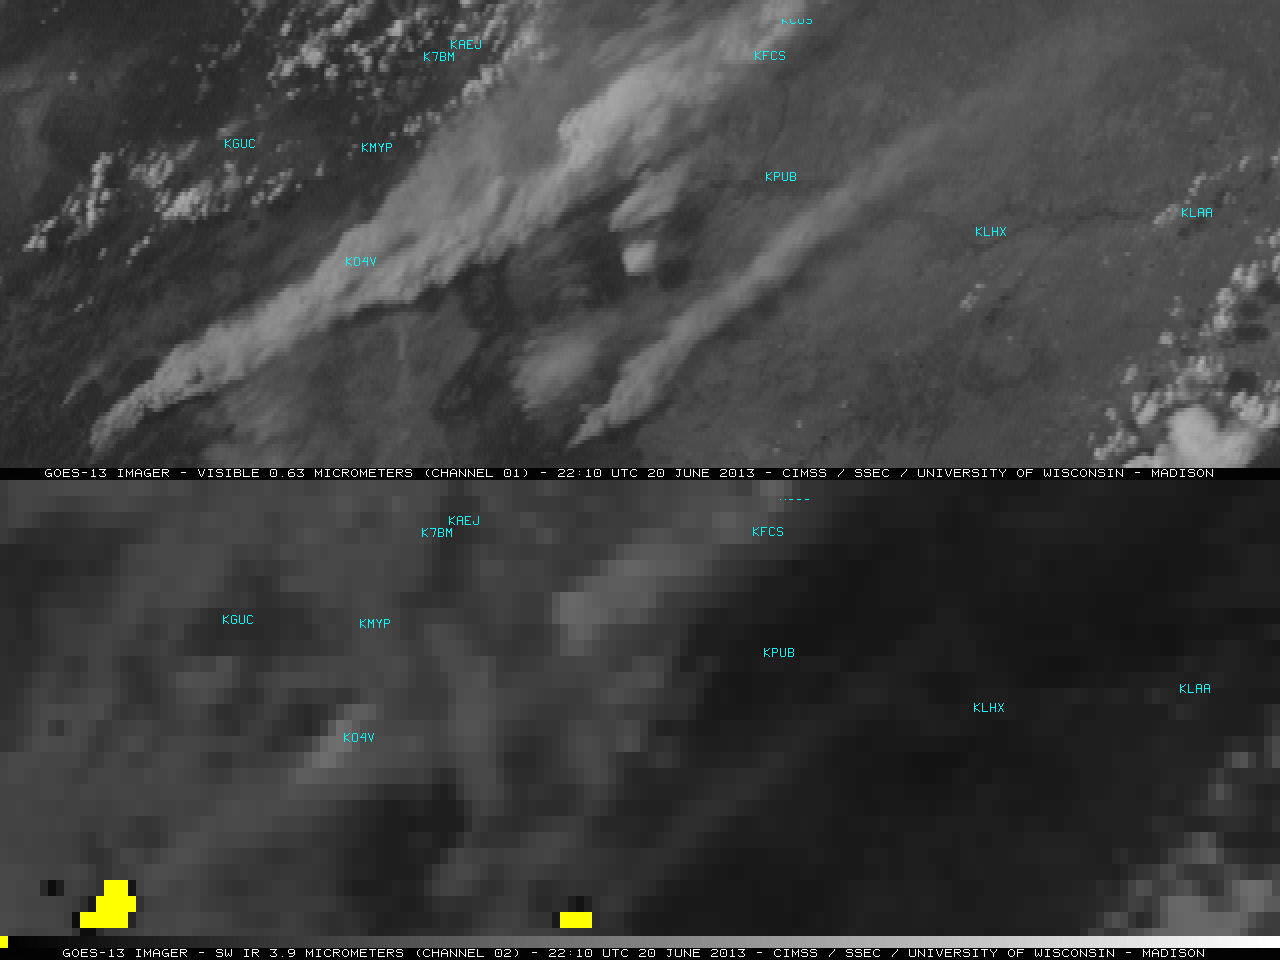 GOES-13 0.63 Âµm visible channel and 3.9 Âµm shortwave IR channel images (click image to play animation)